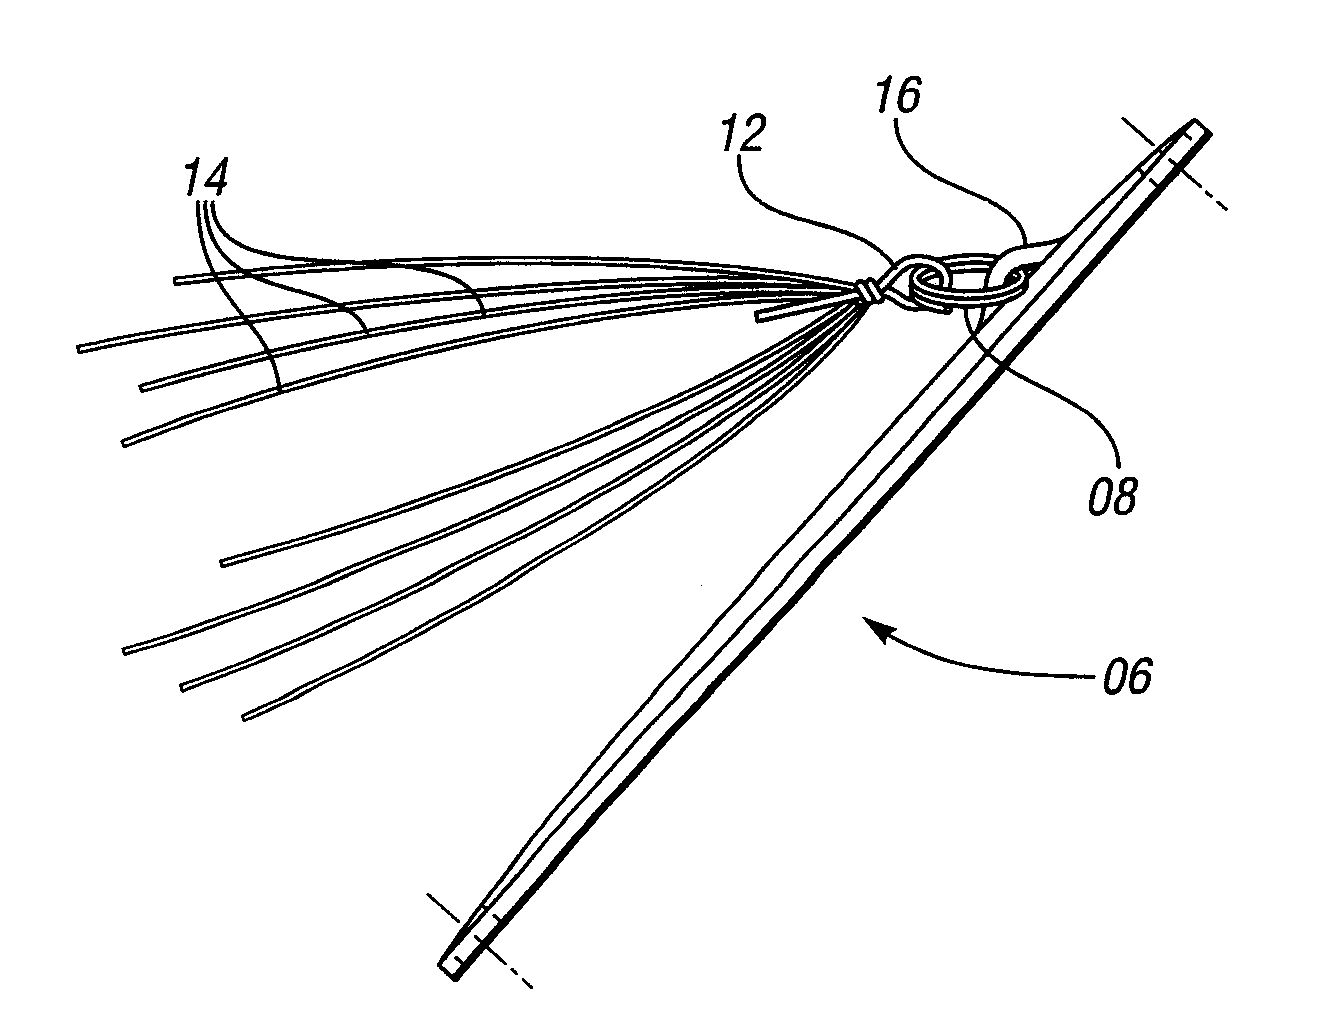 Fiber attractor and attachment apparatus for increasing the attracting tendencies of fishing lures